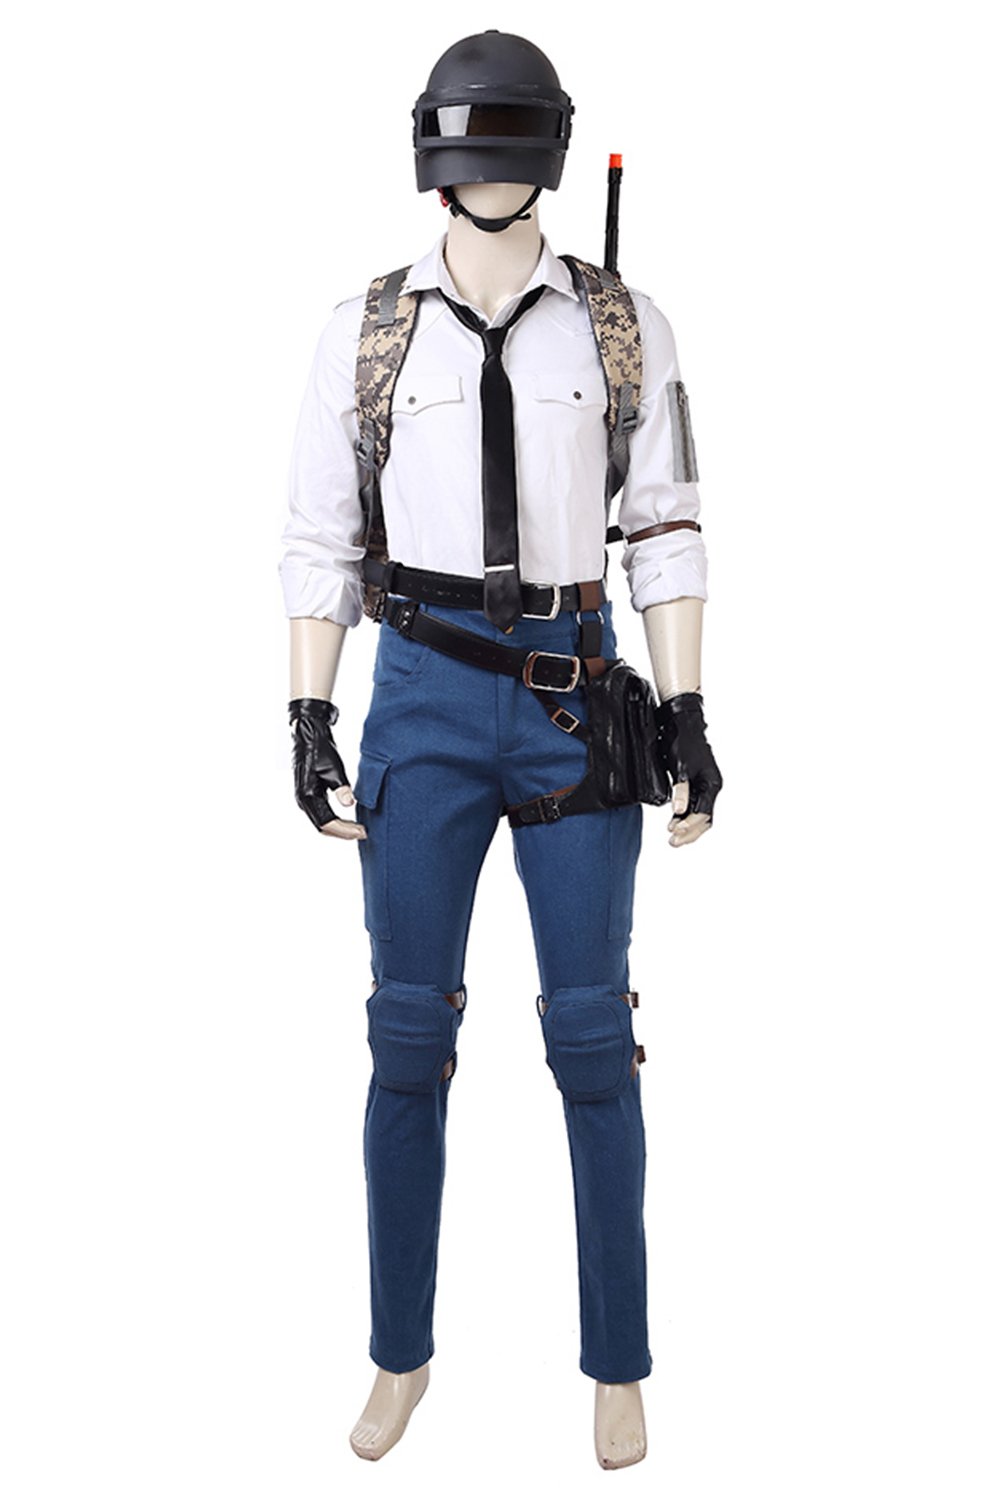 PUBG Outfits Playerunknown's Battlegrounds Cosplay Costumes Whole Set